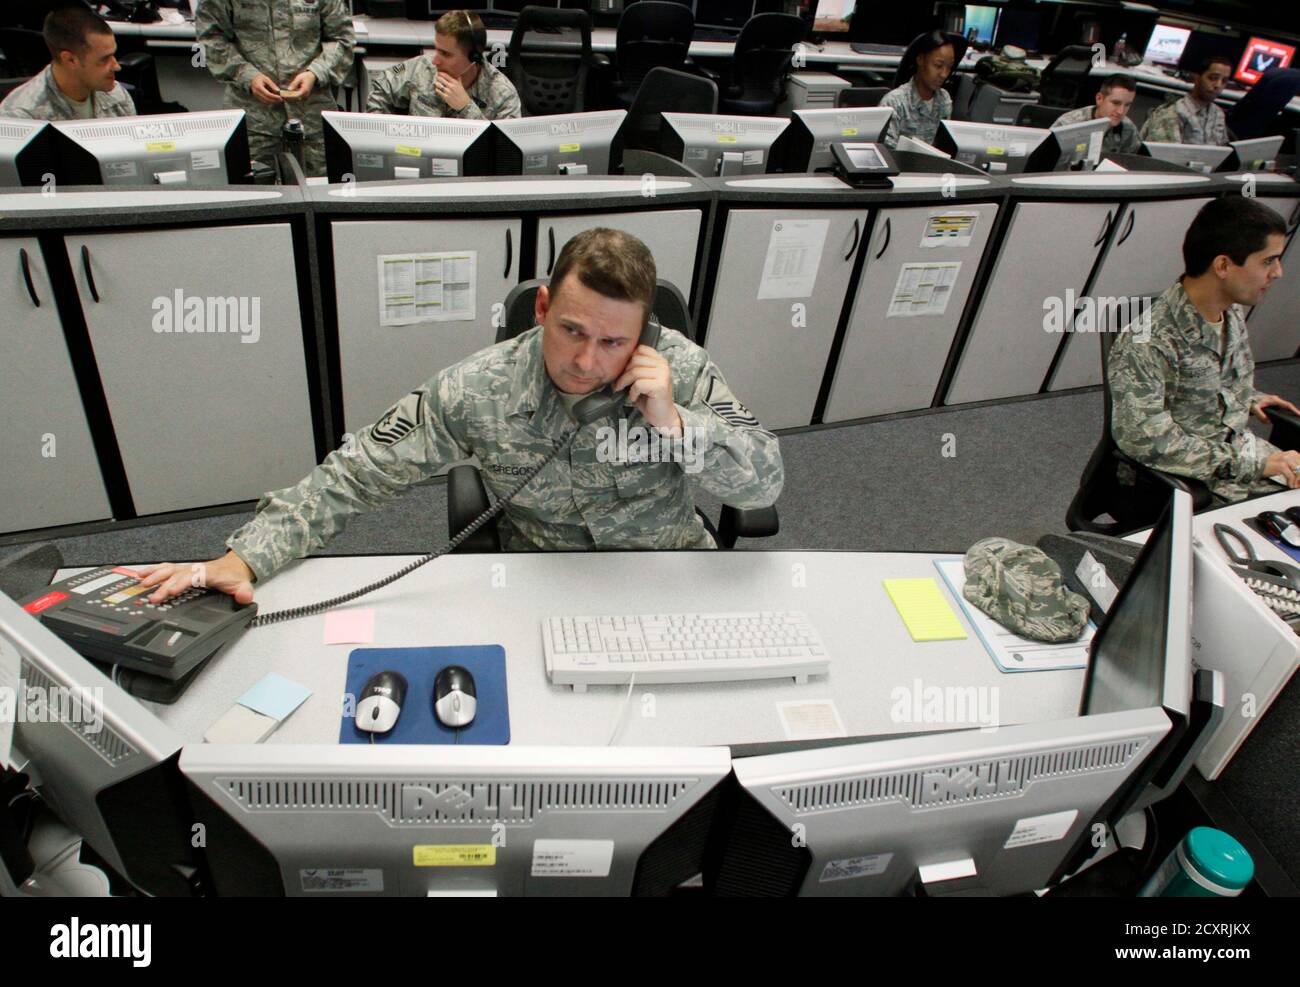 MSgt Michael Gregory, senior operations controller, works at the Air Force Space Command Network Operations & Security Center at Peterson Air Force Base in Colorado Springs, Colorado July 20, 2010. U.S. national security planners are proposing that the 21st century's critical infrastructure -- power grids, communications, water utilities, financial networks -- be similarly shielded from cyber marauders and other foes. The ramparts would be virtual, their perimeters policed by the Pentagon and backed by digital weapons capable of circling the globe in milliseconds to knock out targets.  To matc Stock Photo